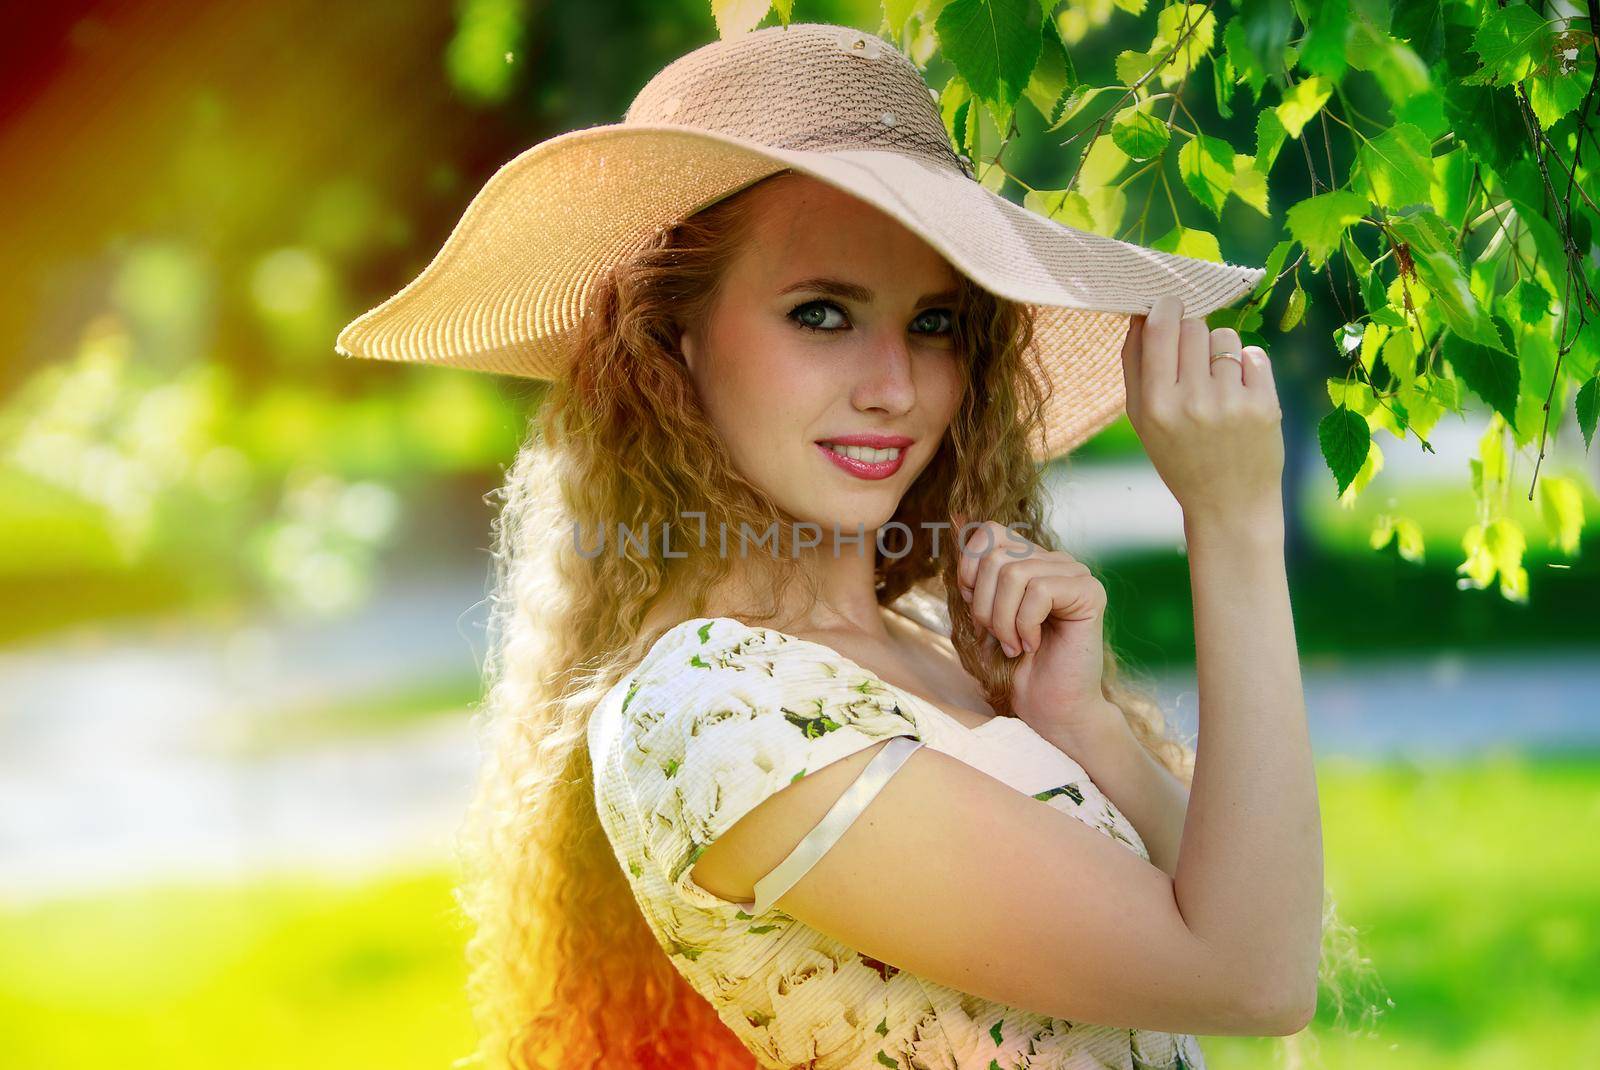 Attractive young womanwearing summer dress and hat enjoying her time outside in park